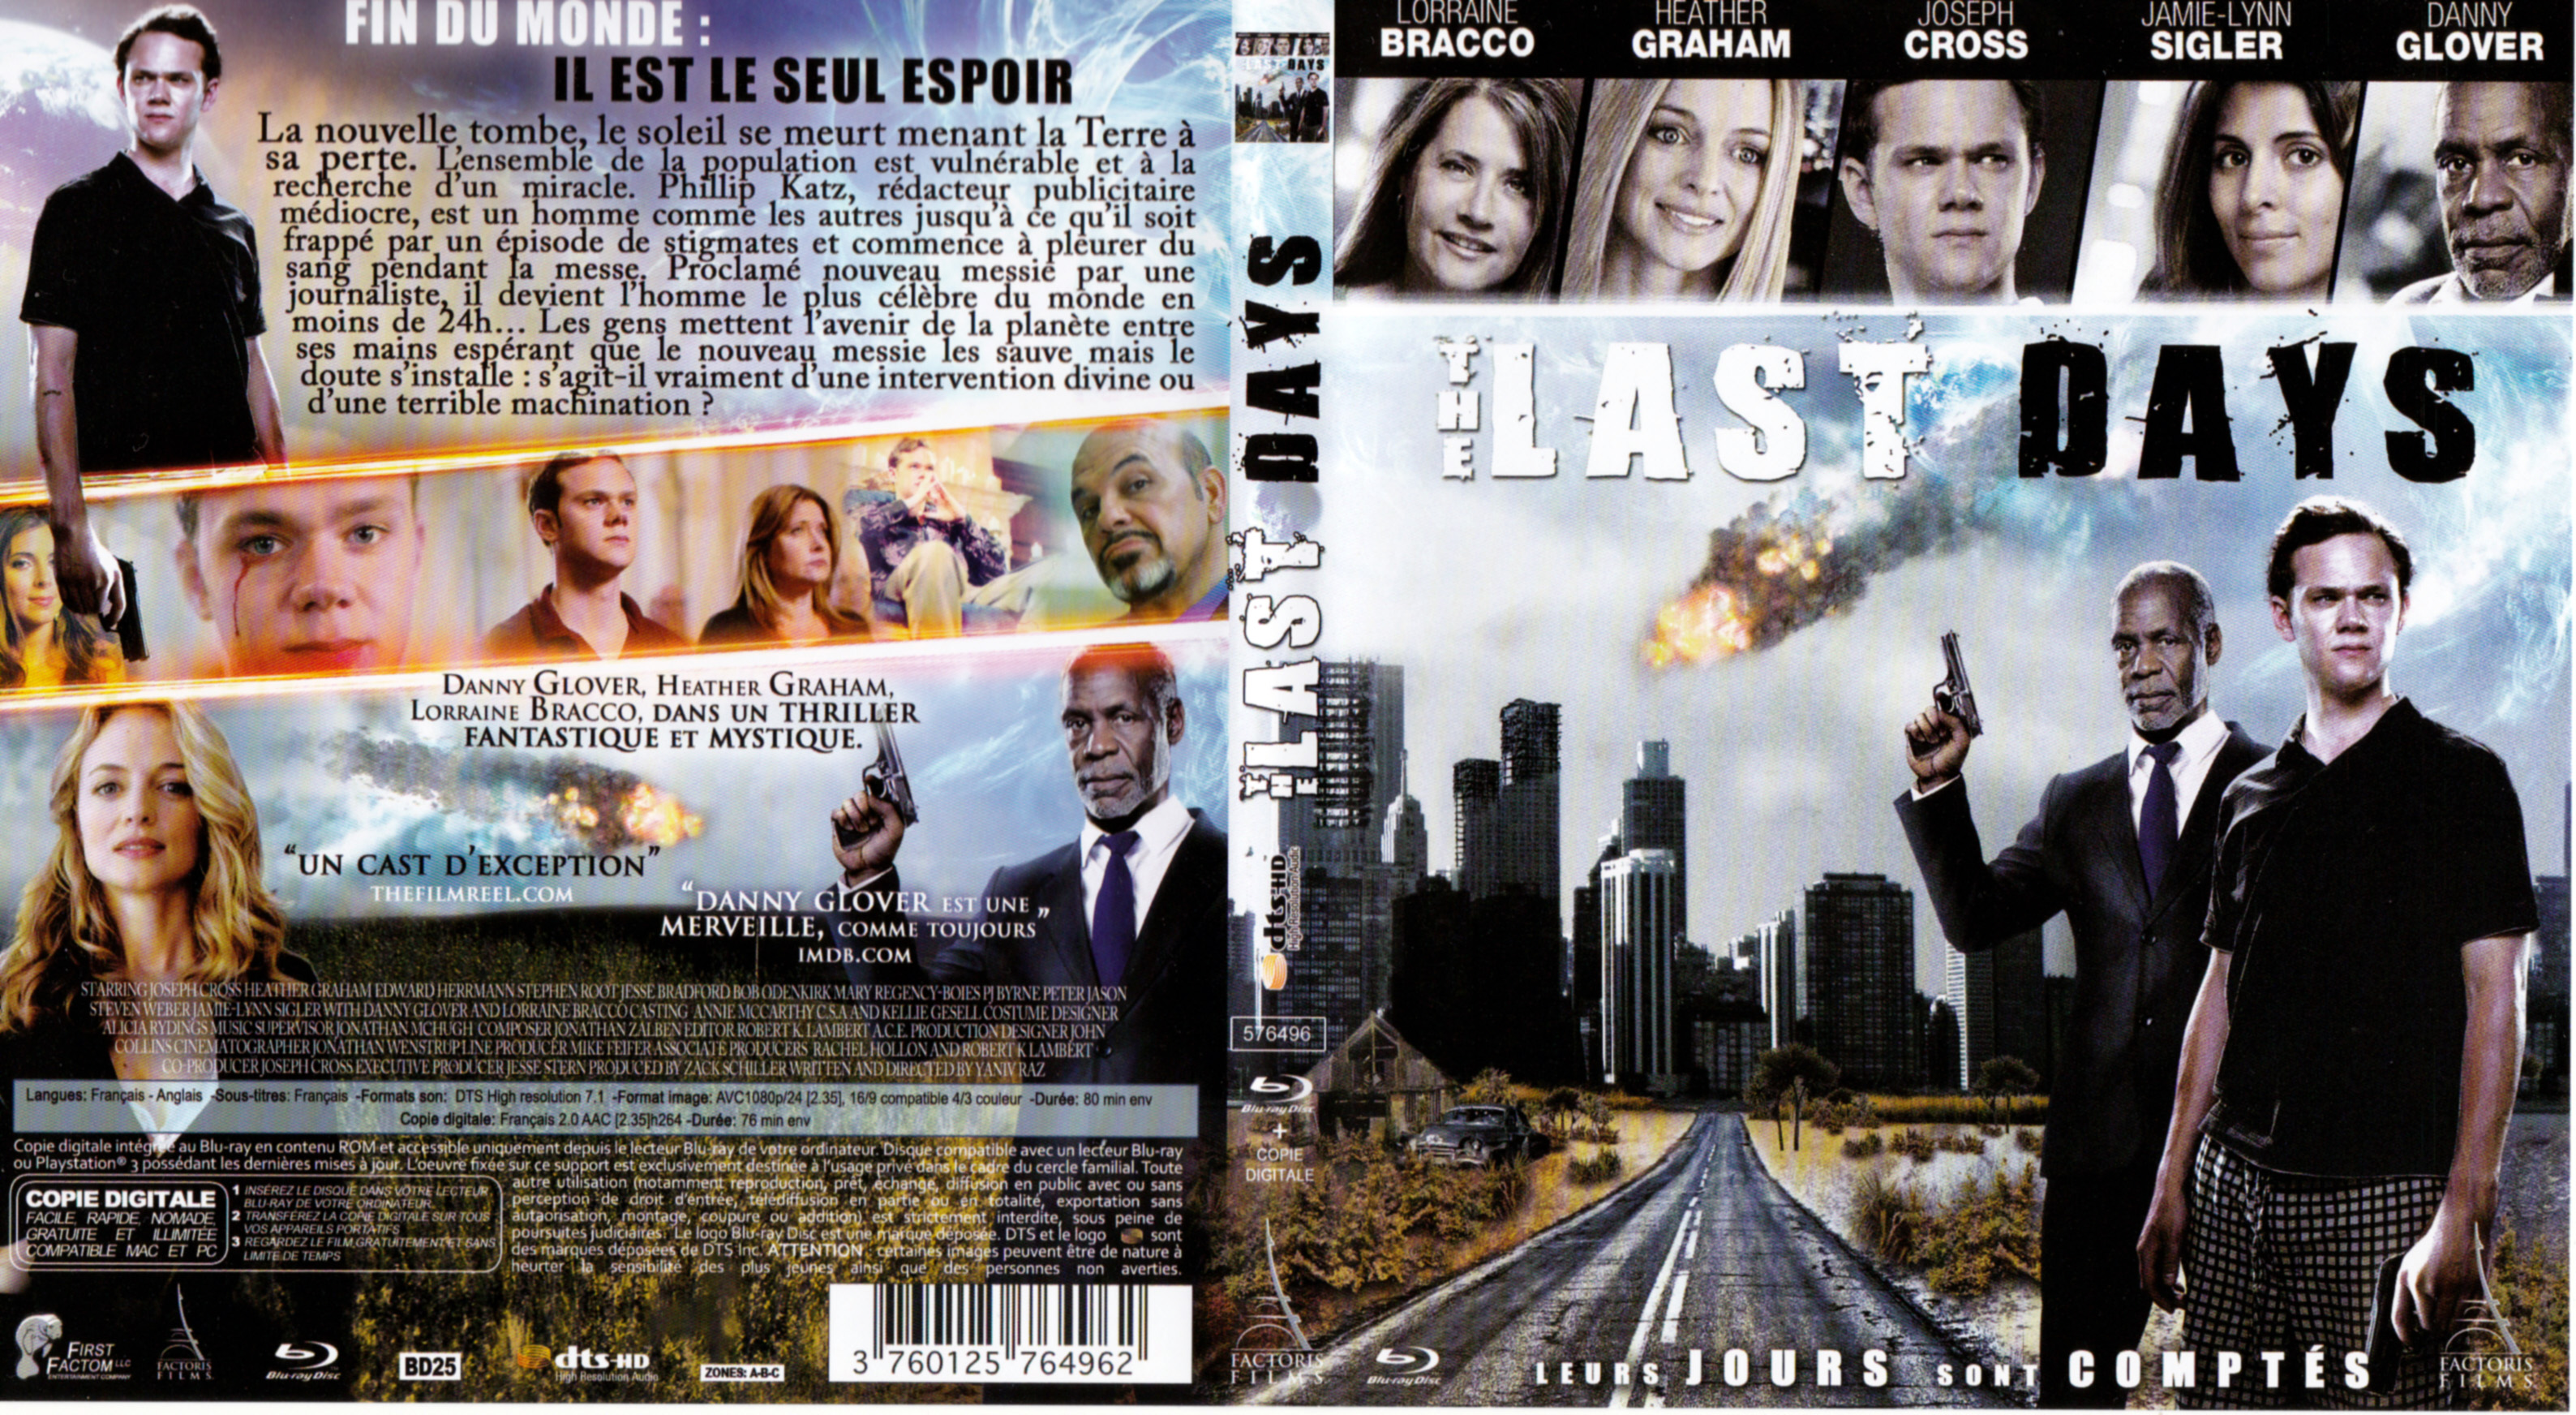 Jaquette DVD The Last Days (BLU-RAY)